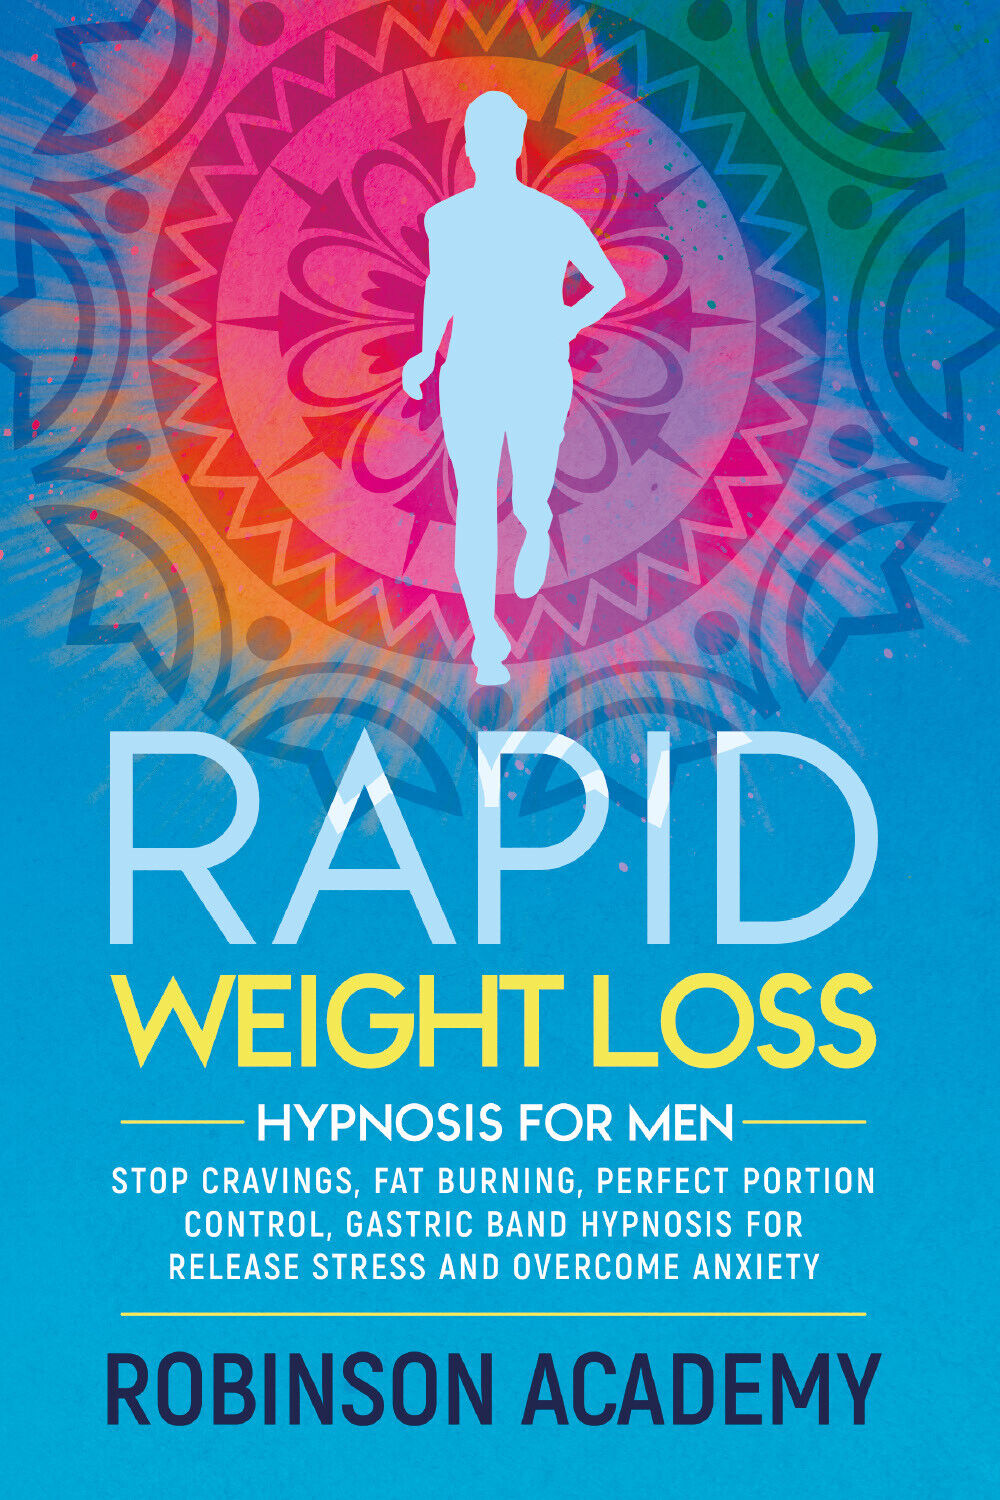 Rapid weight loss hypnosis for men. Stop Cravings, Fat Burning, Perfect Portion  libro usato